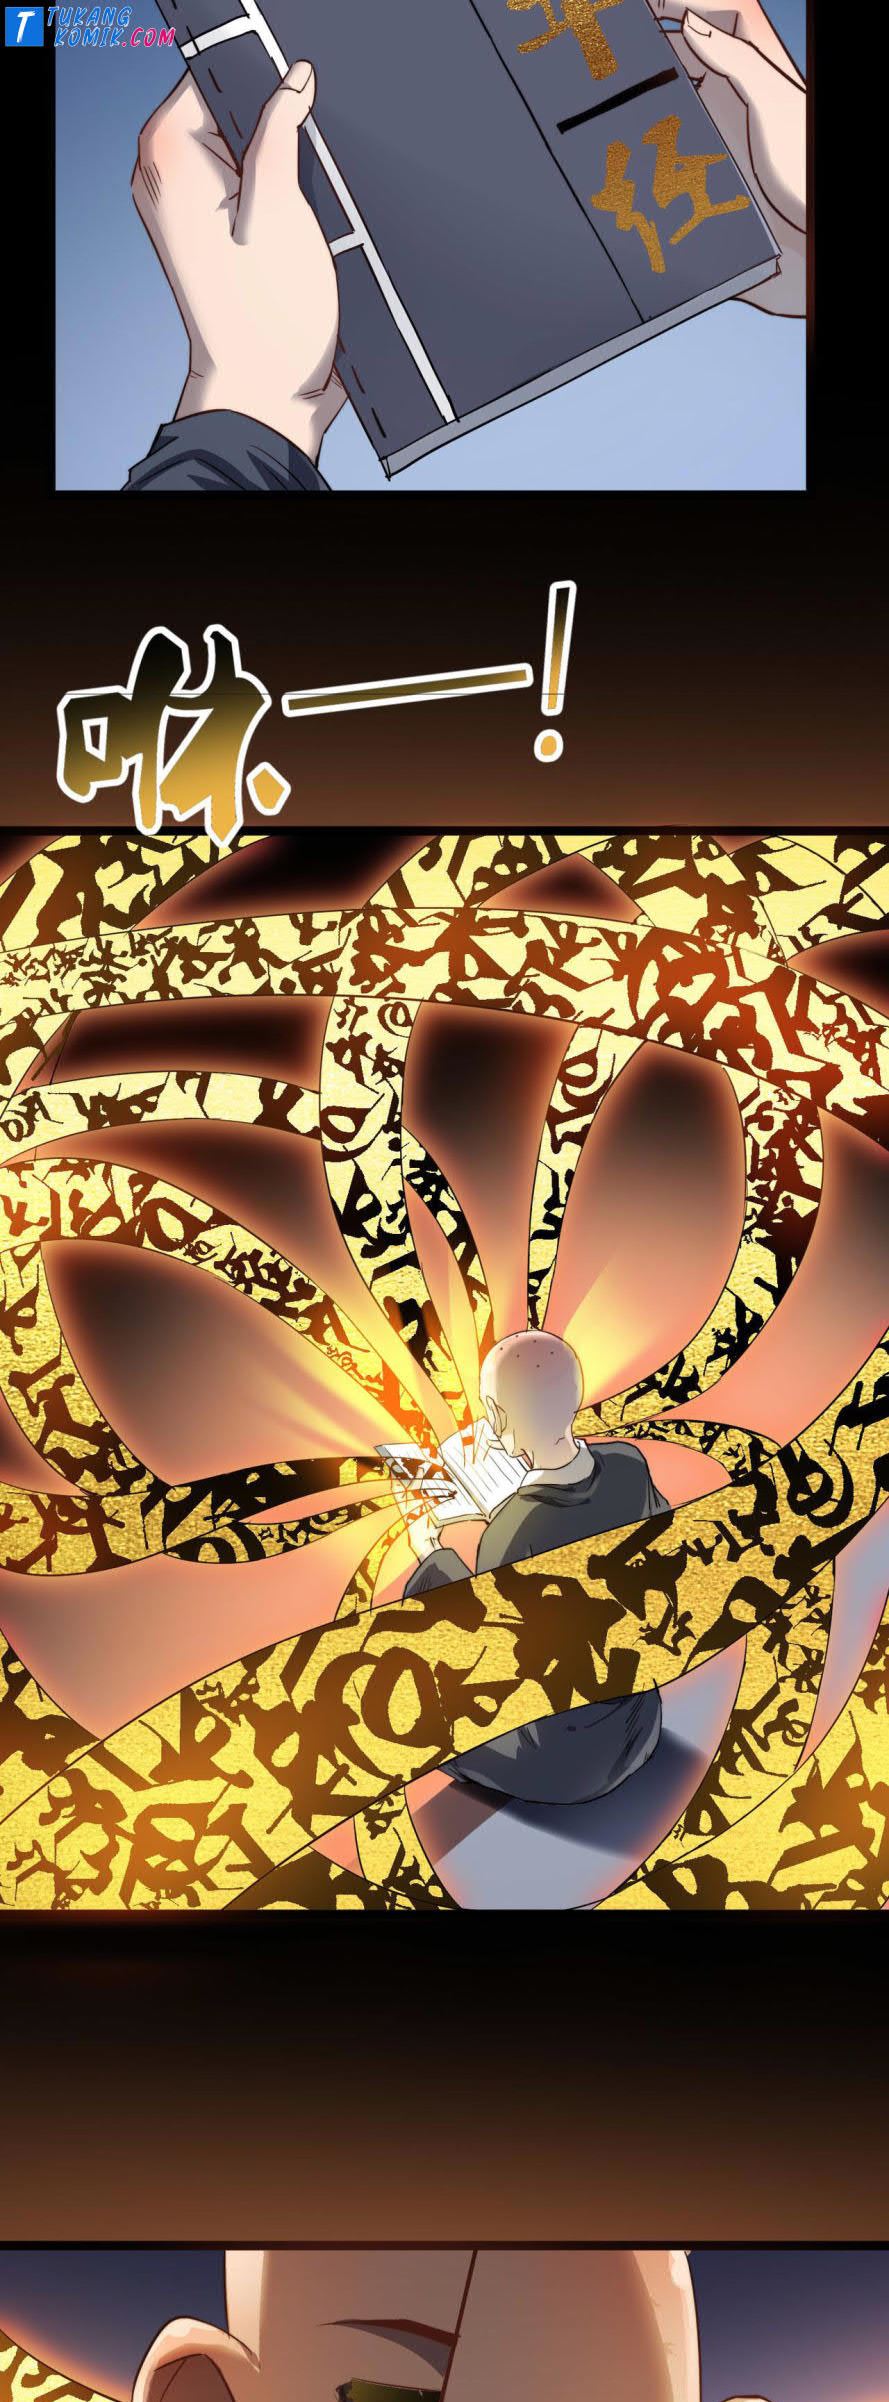 Dilarang COPAS - situs resmi www.mangacanblog.com - Komik building the strongest shaolin temple in another world 007 - chapter 7 8 Indonesia building the strongest shaolin temple in another world 007 - chapter 7 Terbaru 24|Baca Manga Komik Indonesia|Mangacan